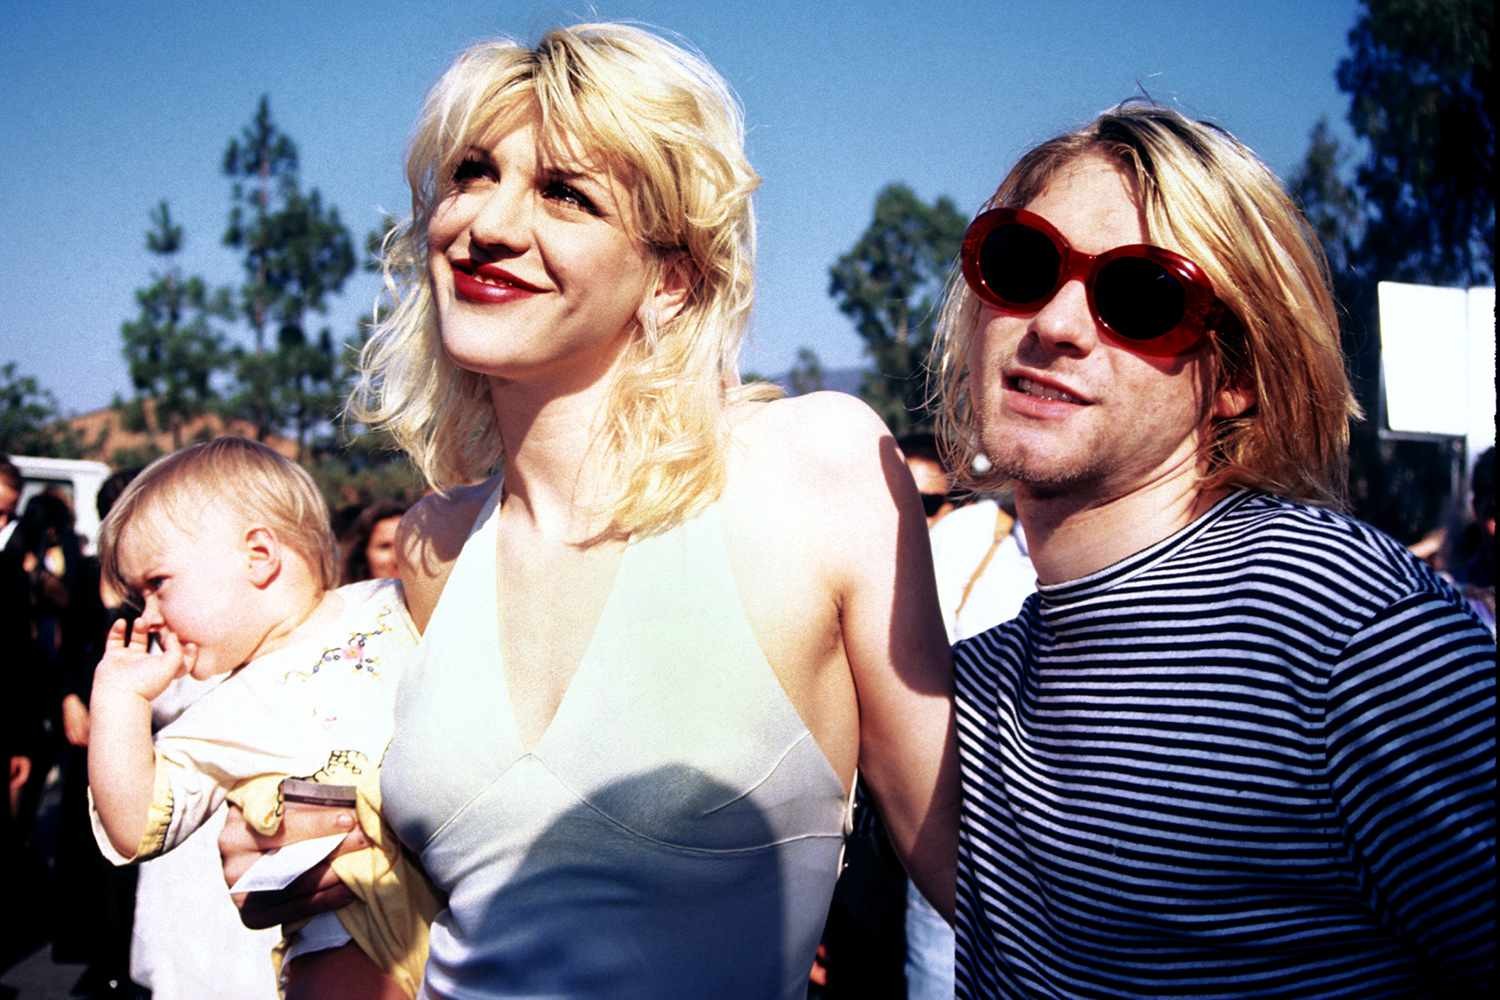 Courtney Love and Kurt Cobain with their child